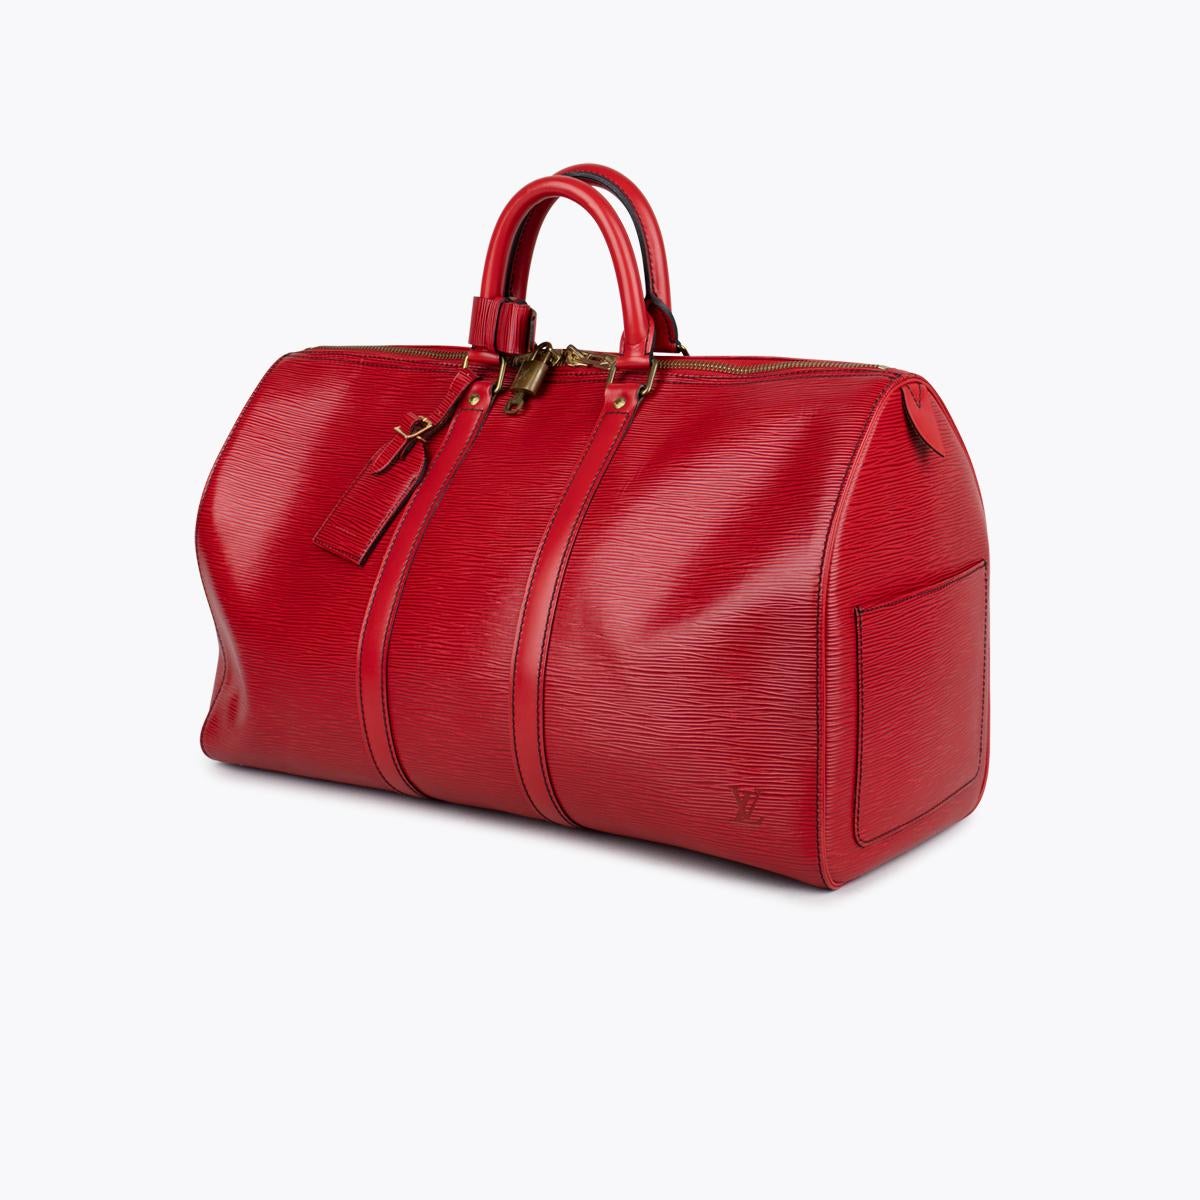 Red Epi leather Louis Vuitton Keepall 45 with

– Brass hardware
– Black contrast stitching throughout
– Dual rolled top handles
– Single slit pocket at exterior side
– Embossed logo embellishment at front face, tonal suede interior and zip closure